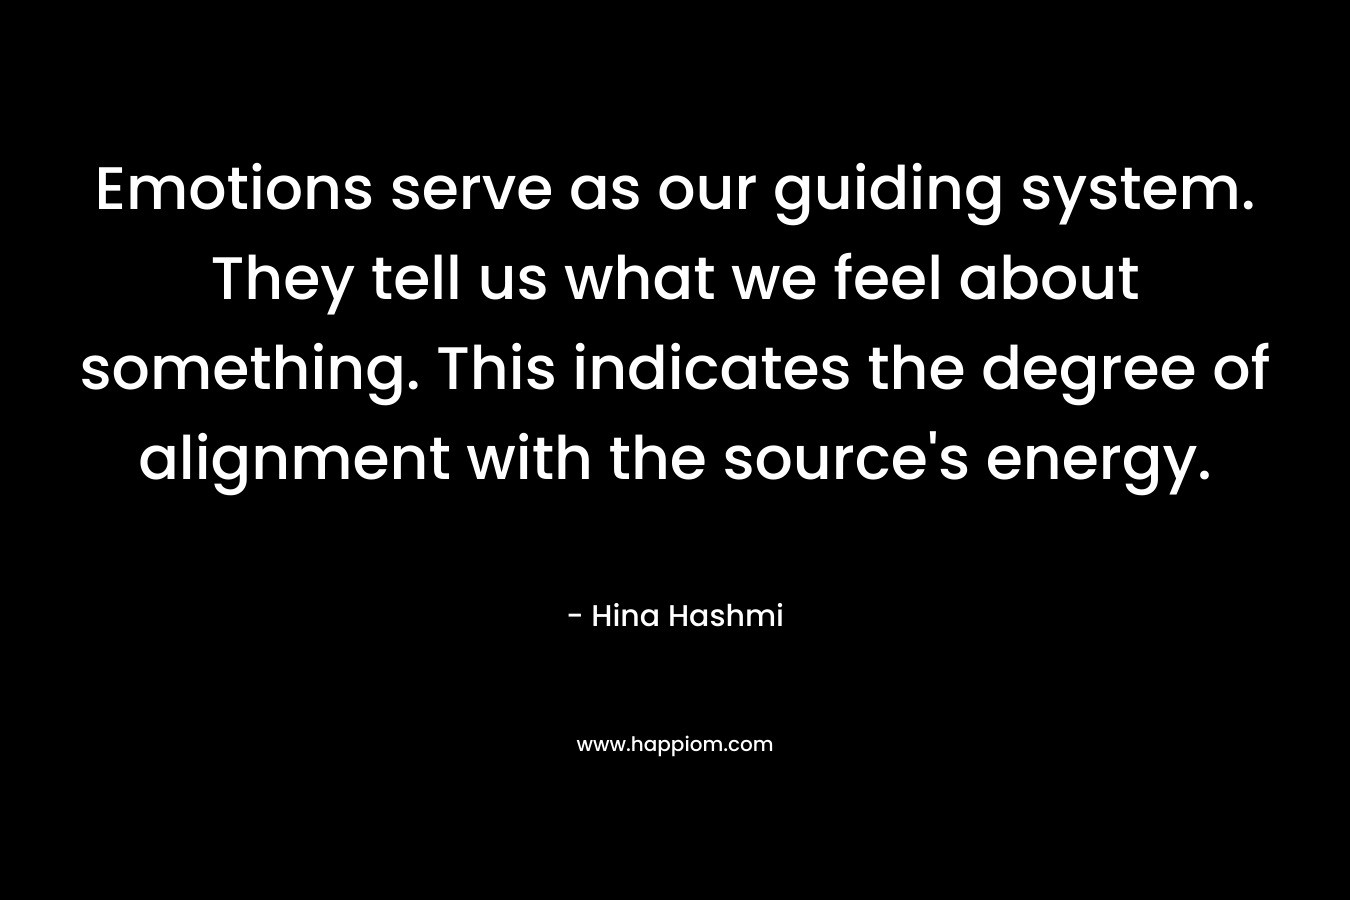 Emotions serve as our guiding system. They tell us what we feel about something. This indicates the degree of alignment with the source’s energy. – Hina Hashmi